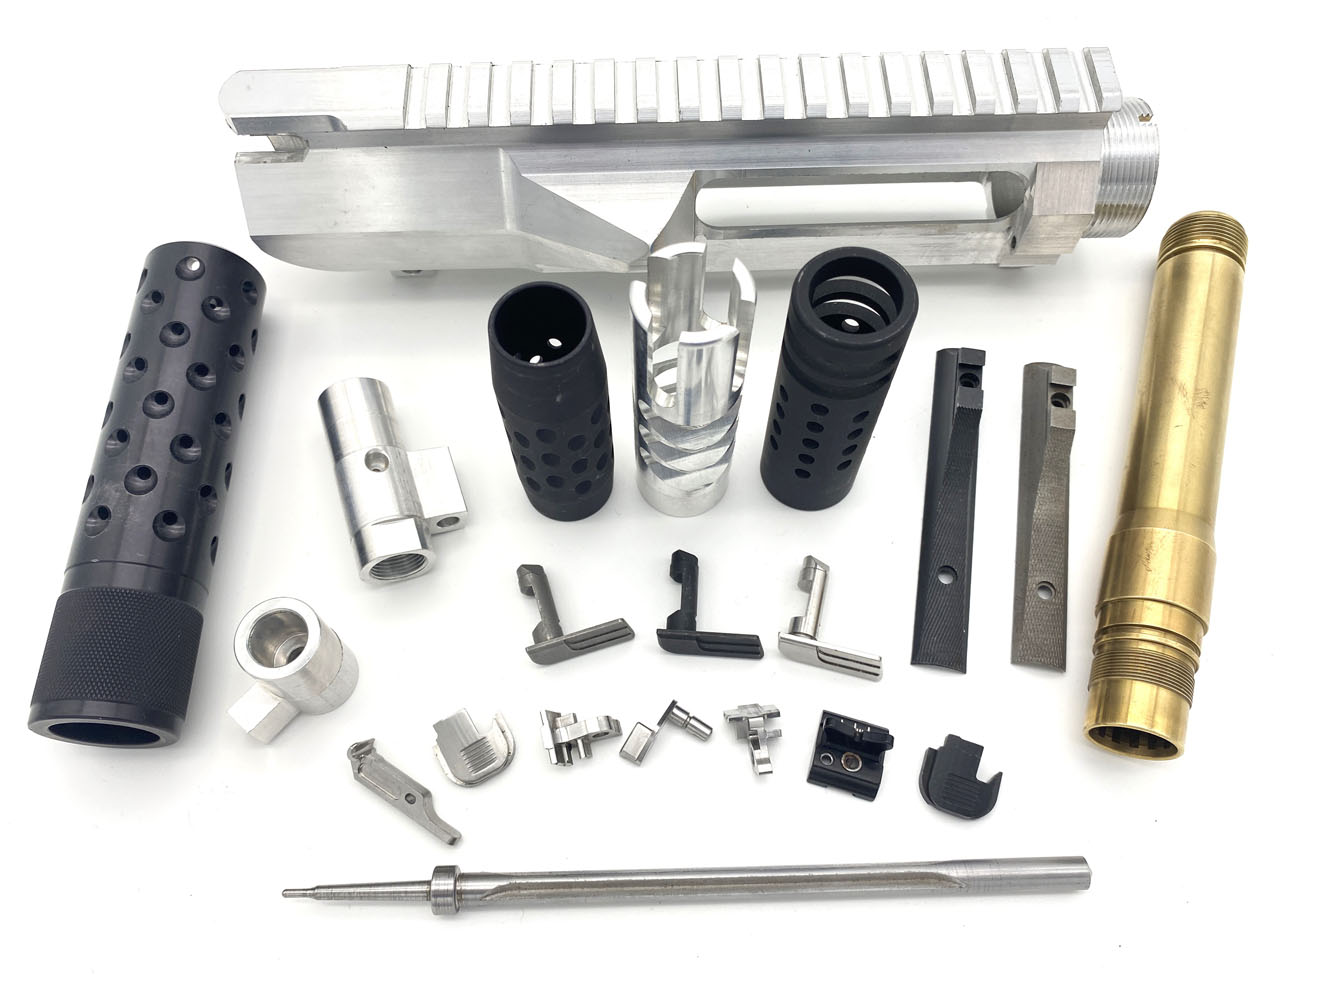 Firearms & Paintball Components